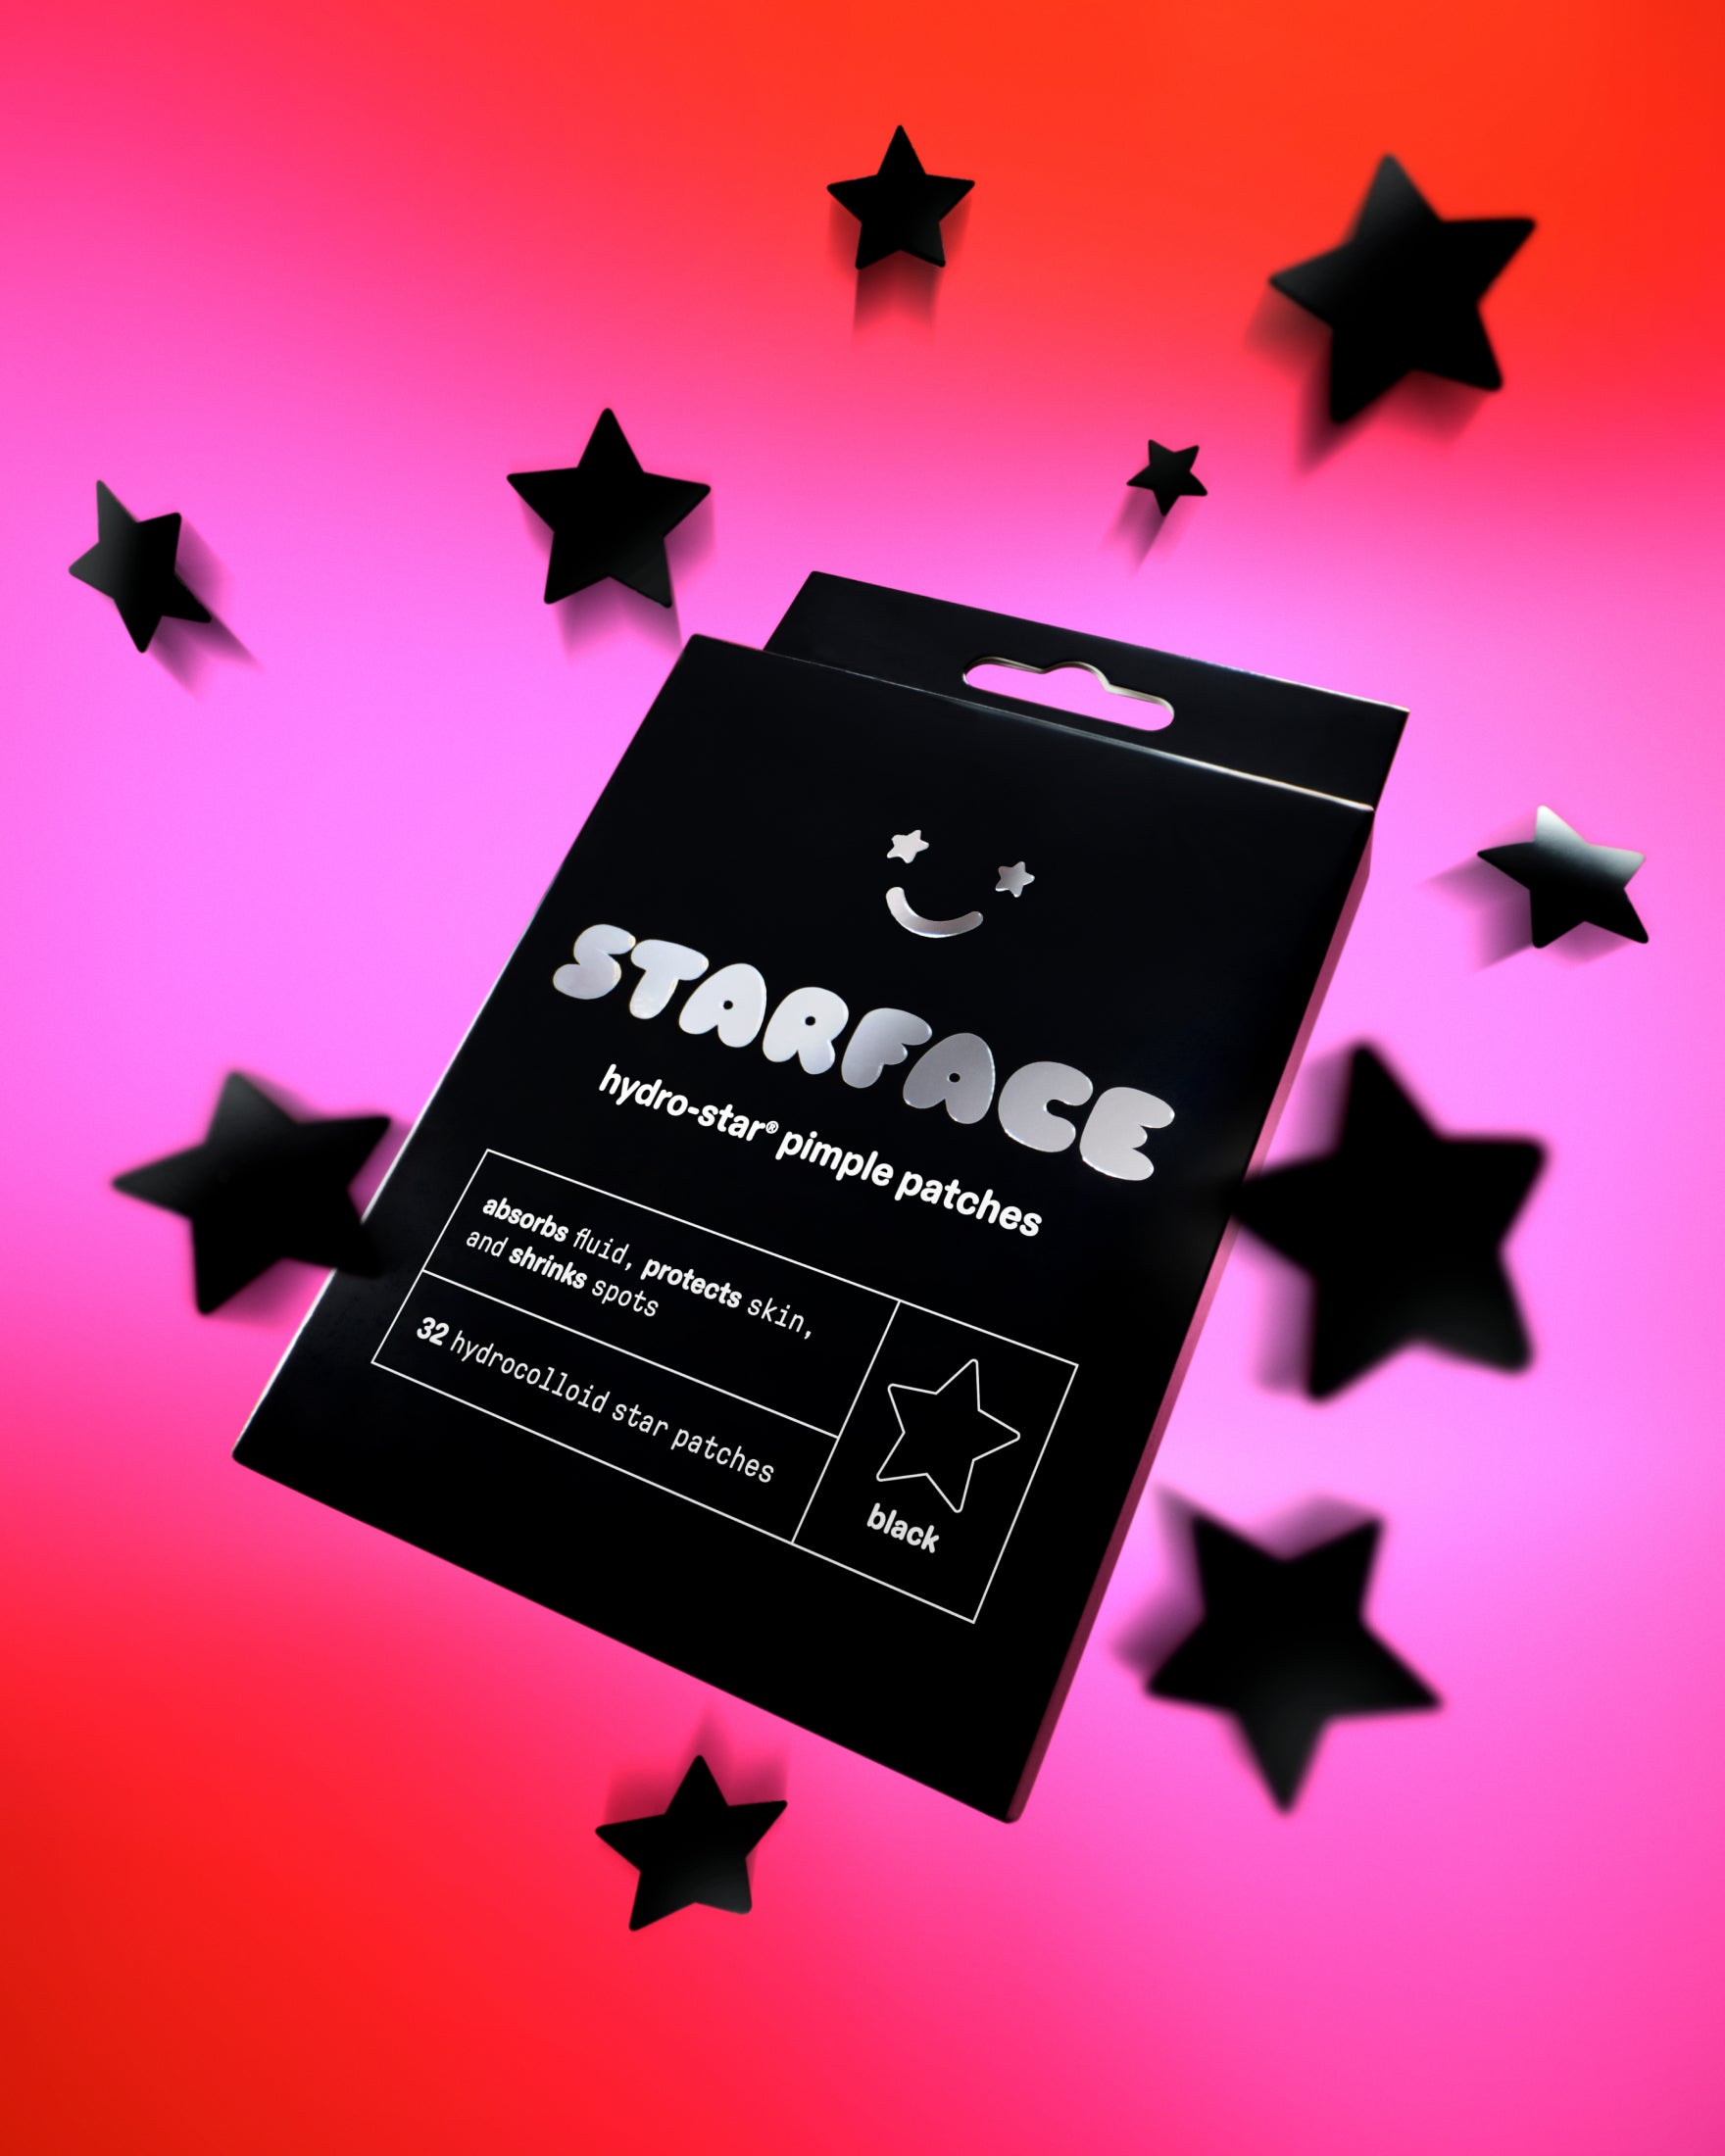 A package of black Hydro-Star pimple patches on a pink background with floating black stars.